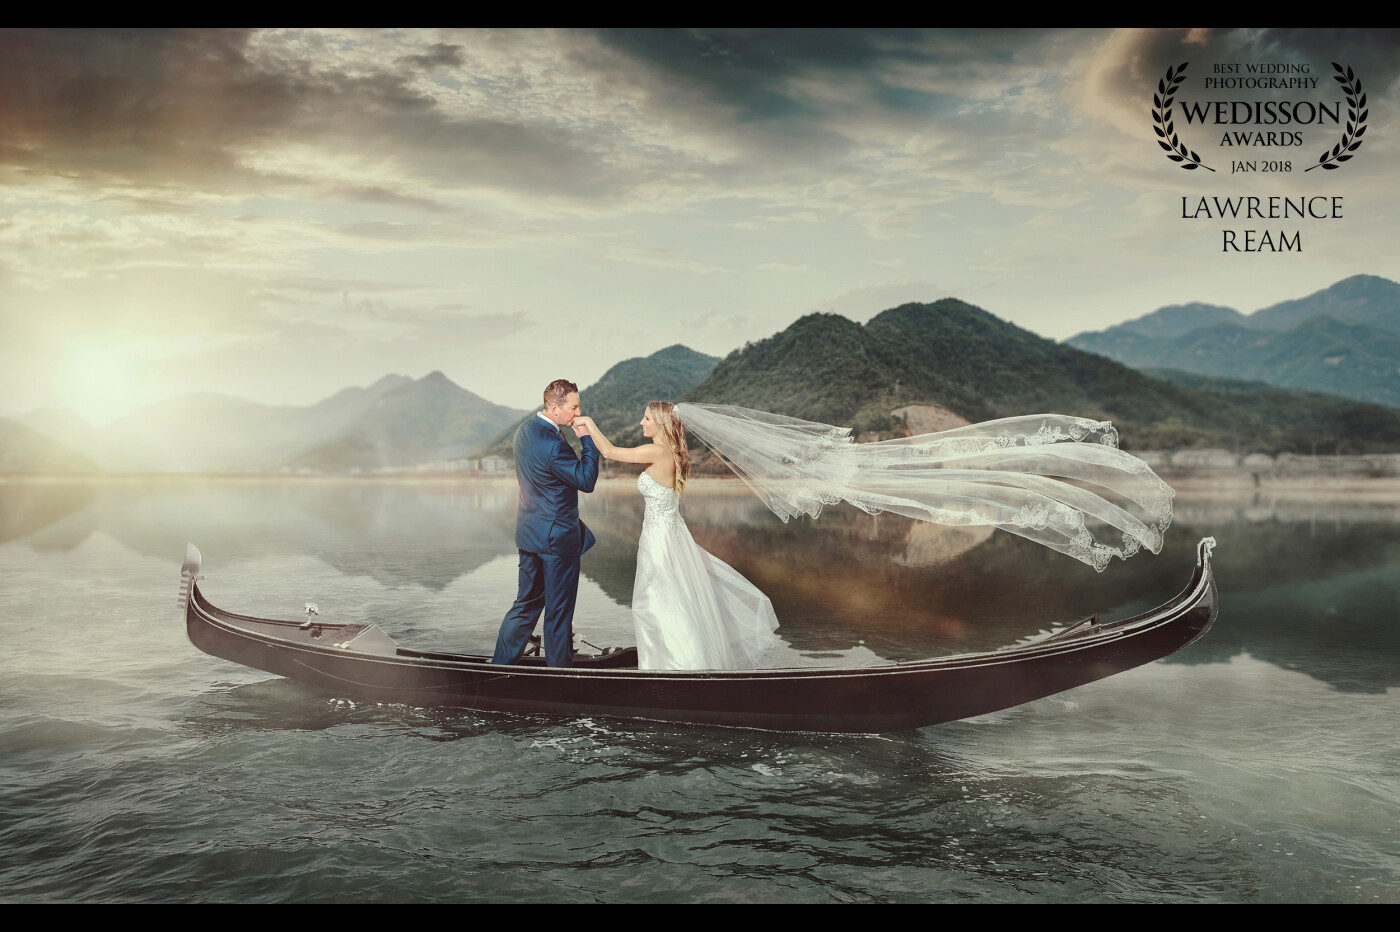 I had to do something extra special for this bride and groom as the bride was a good friend of my significant other. After much deliberation I decided to take this photo to the next level. What's more romantic than a gondola with the groom taking his lovers hand to kiss it? Classy, Romantic, Sophisticated. #lawrencereamphotography 